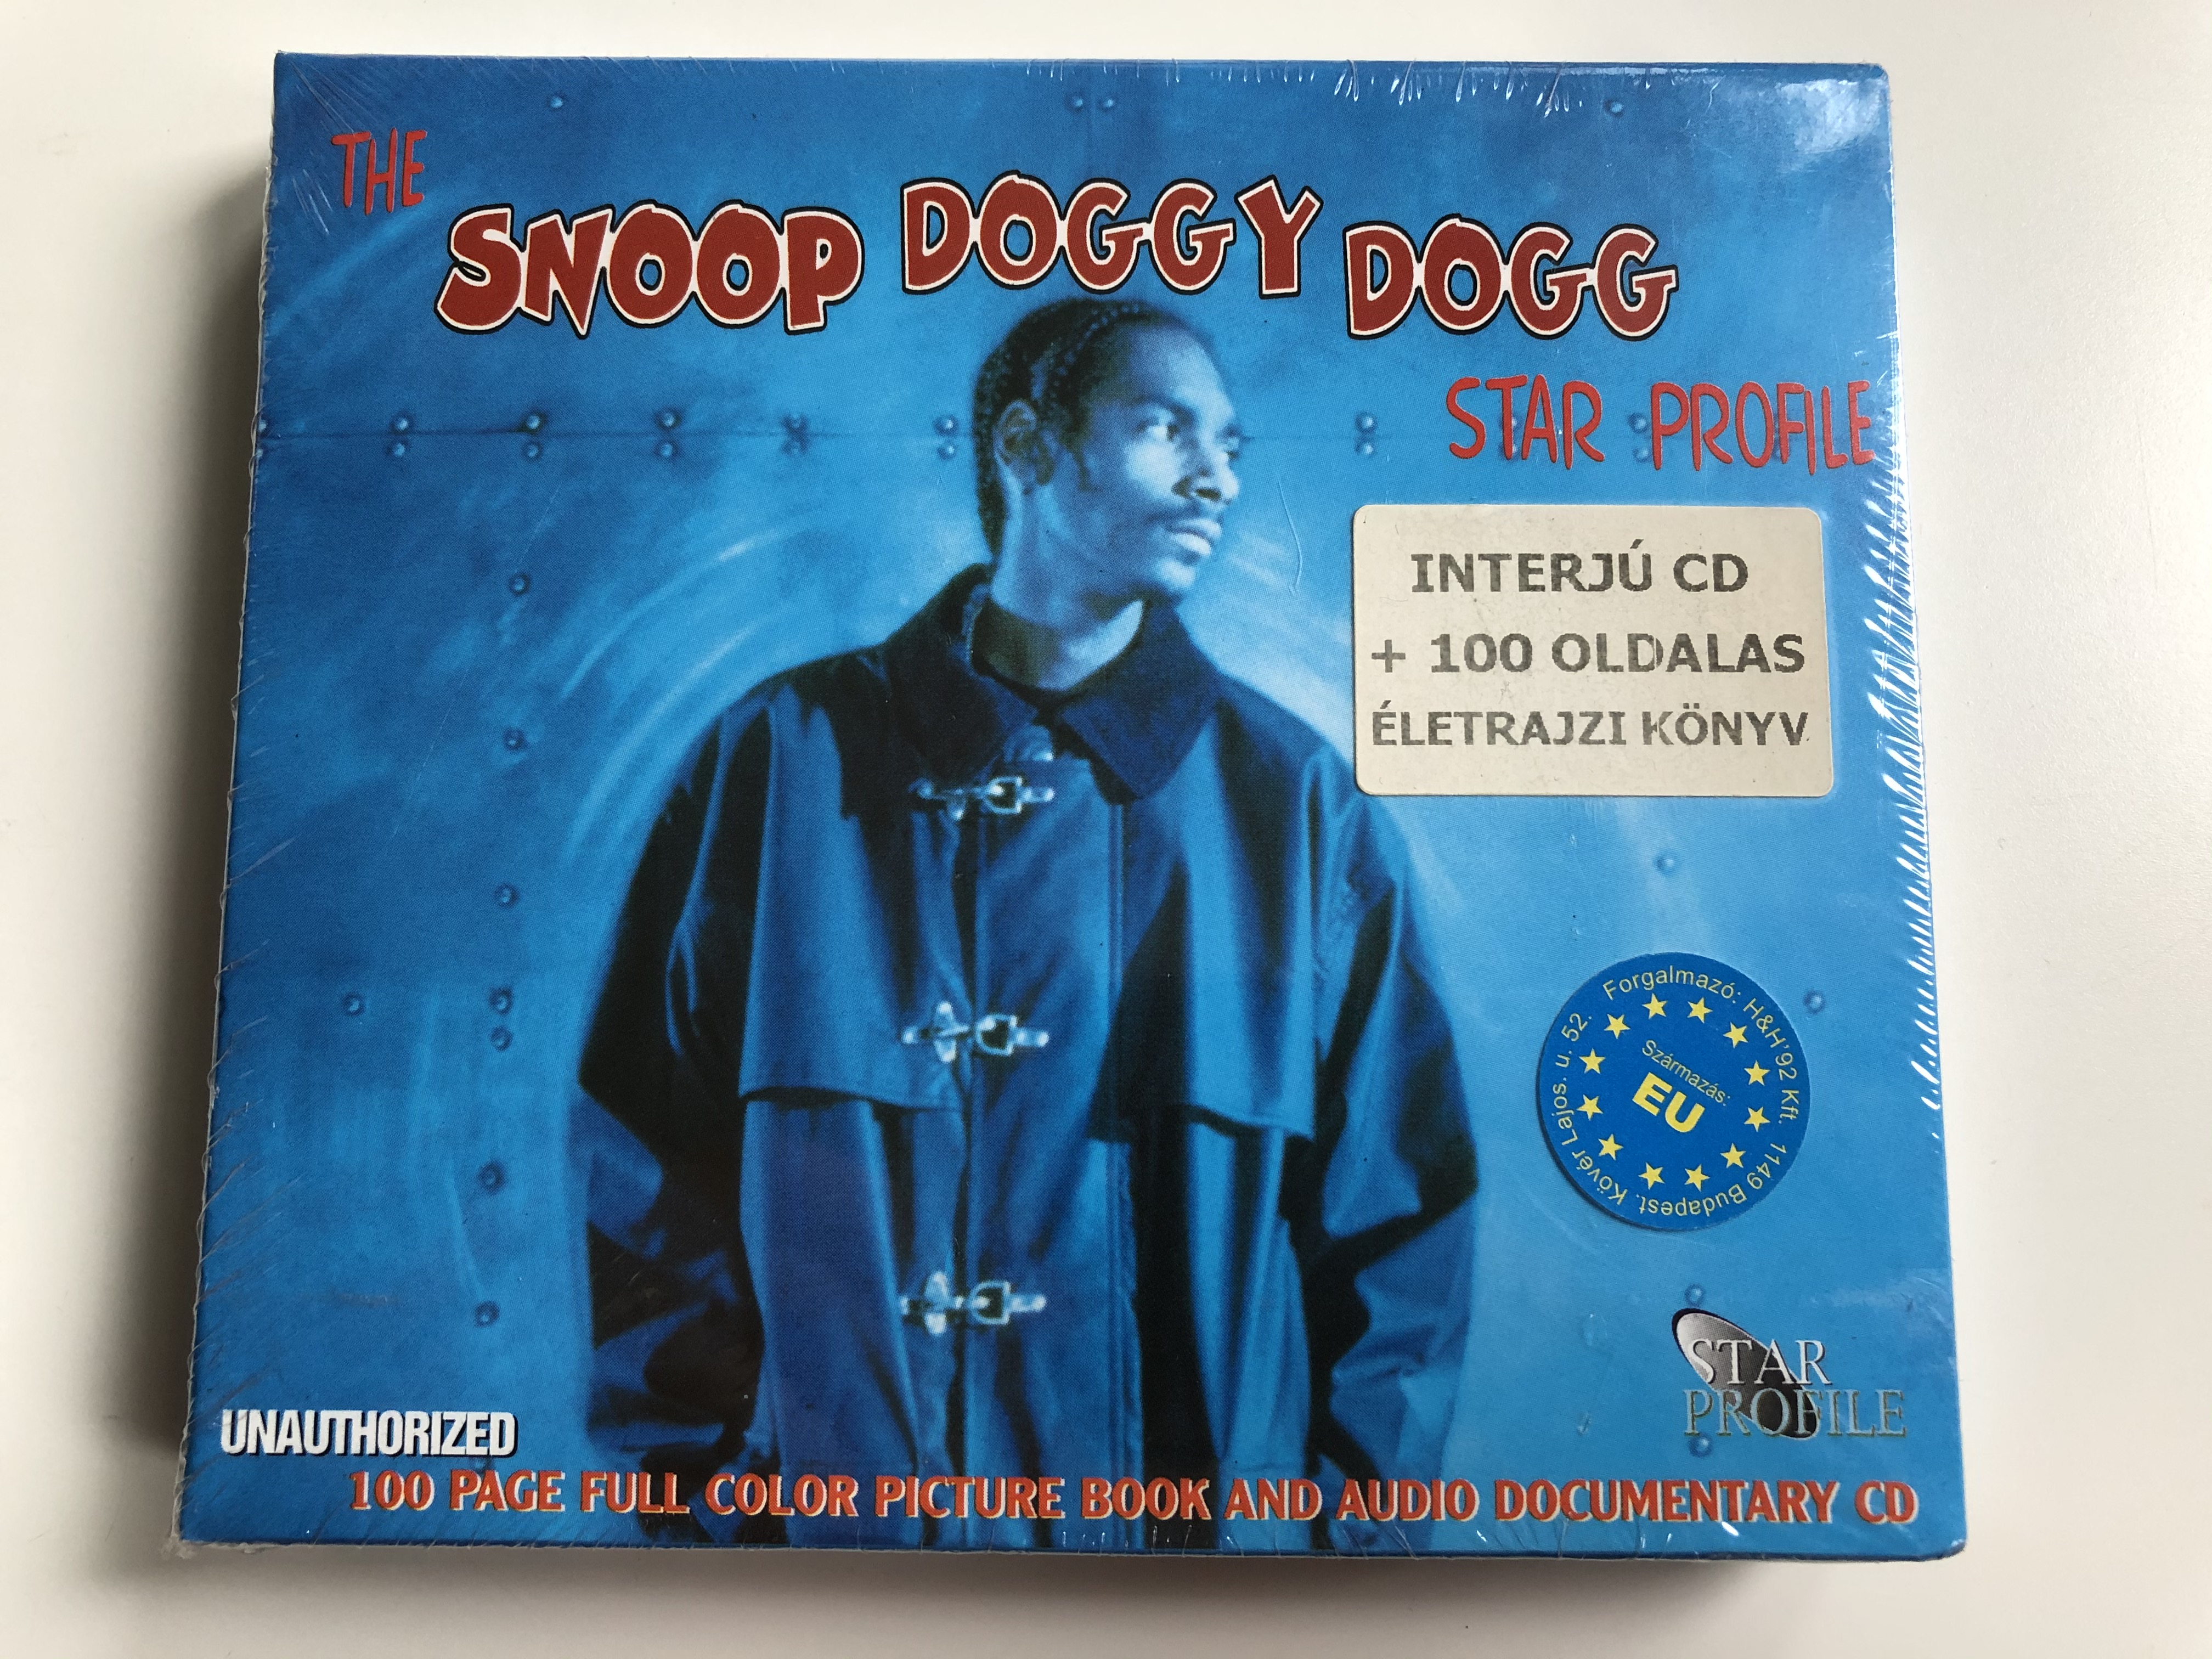 the-snoop-doggy-dogg-star-profile-100-page-full-color-picture-book-and-audio-documentary-cd-point-entertainment-ltd.-audio-cd-collcetors-book-1999-8248-1-.jpg